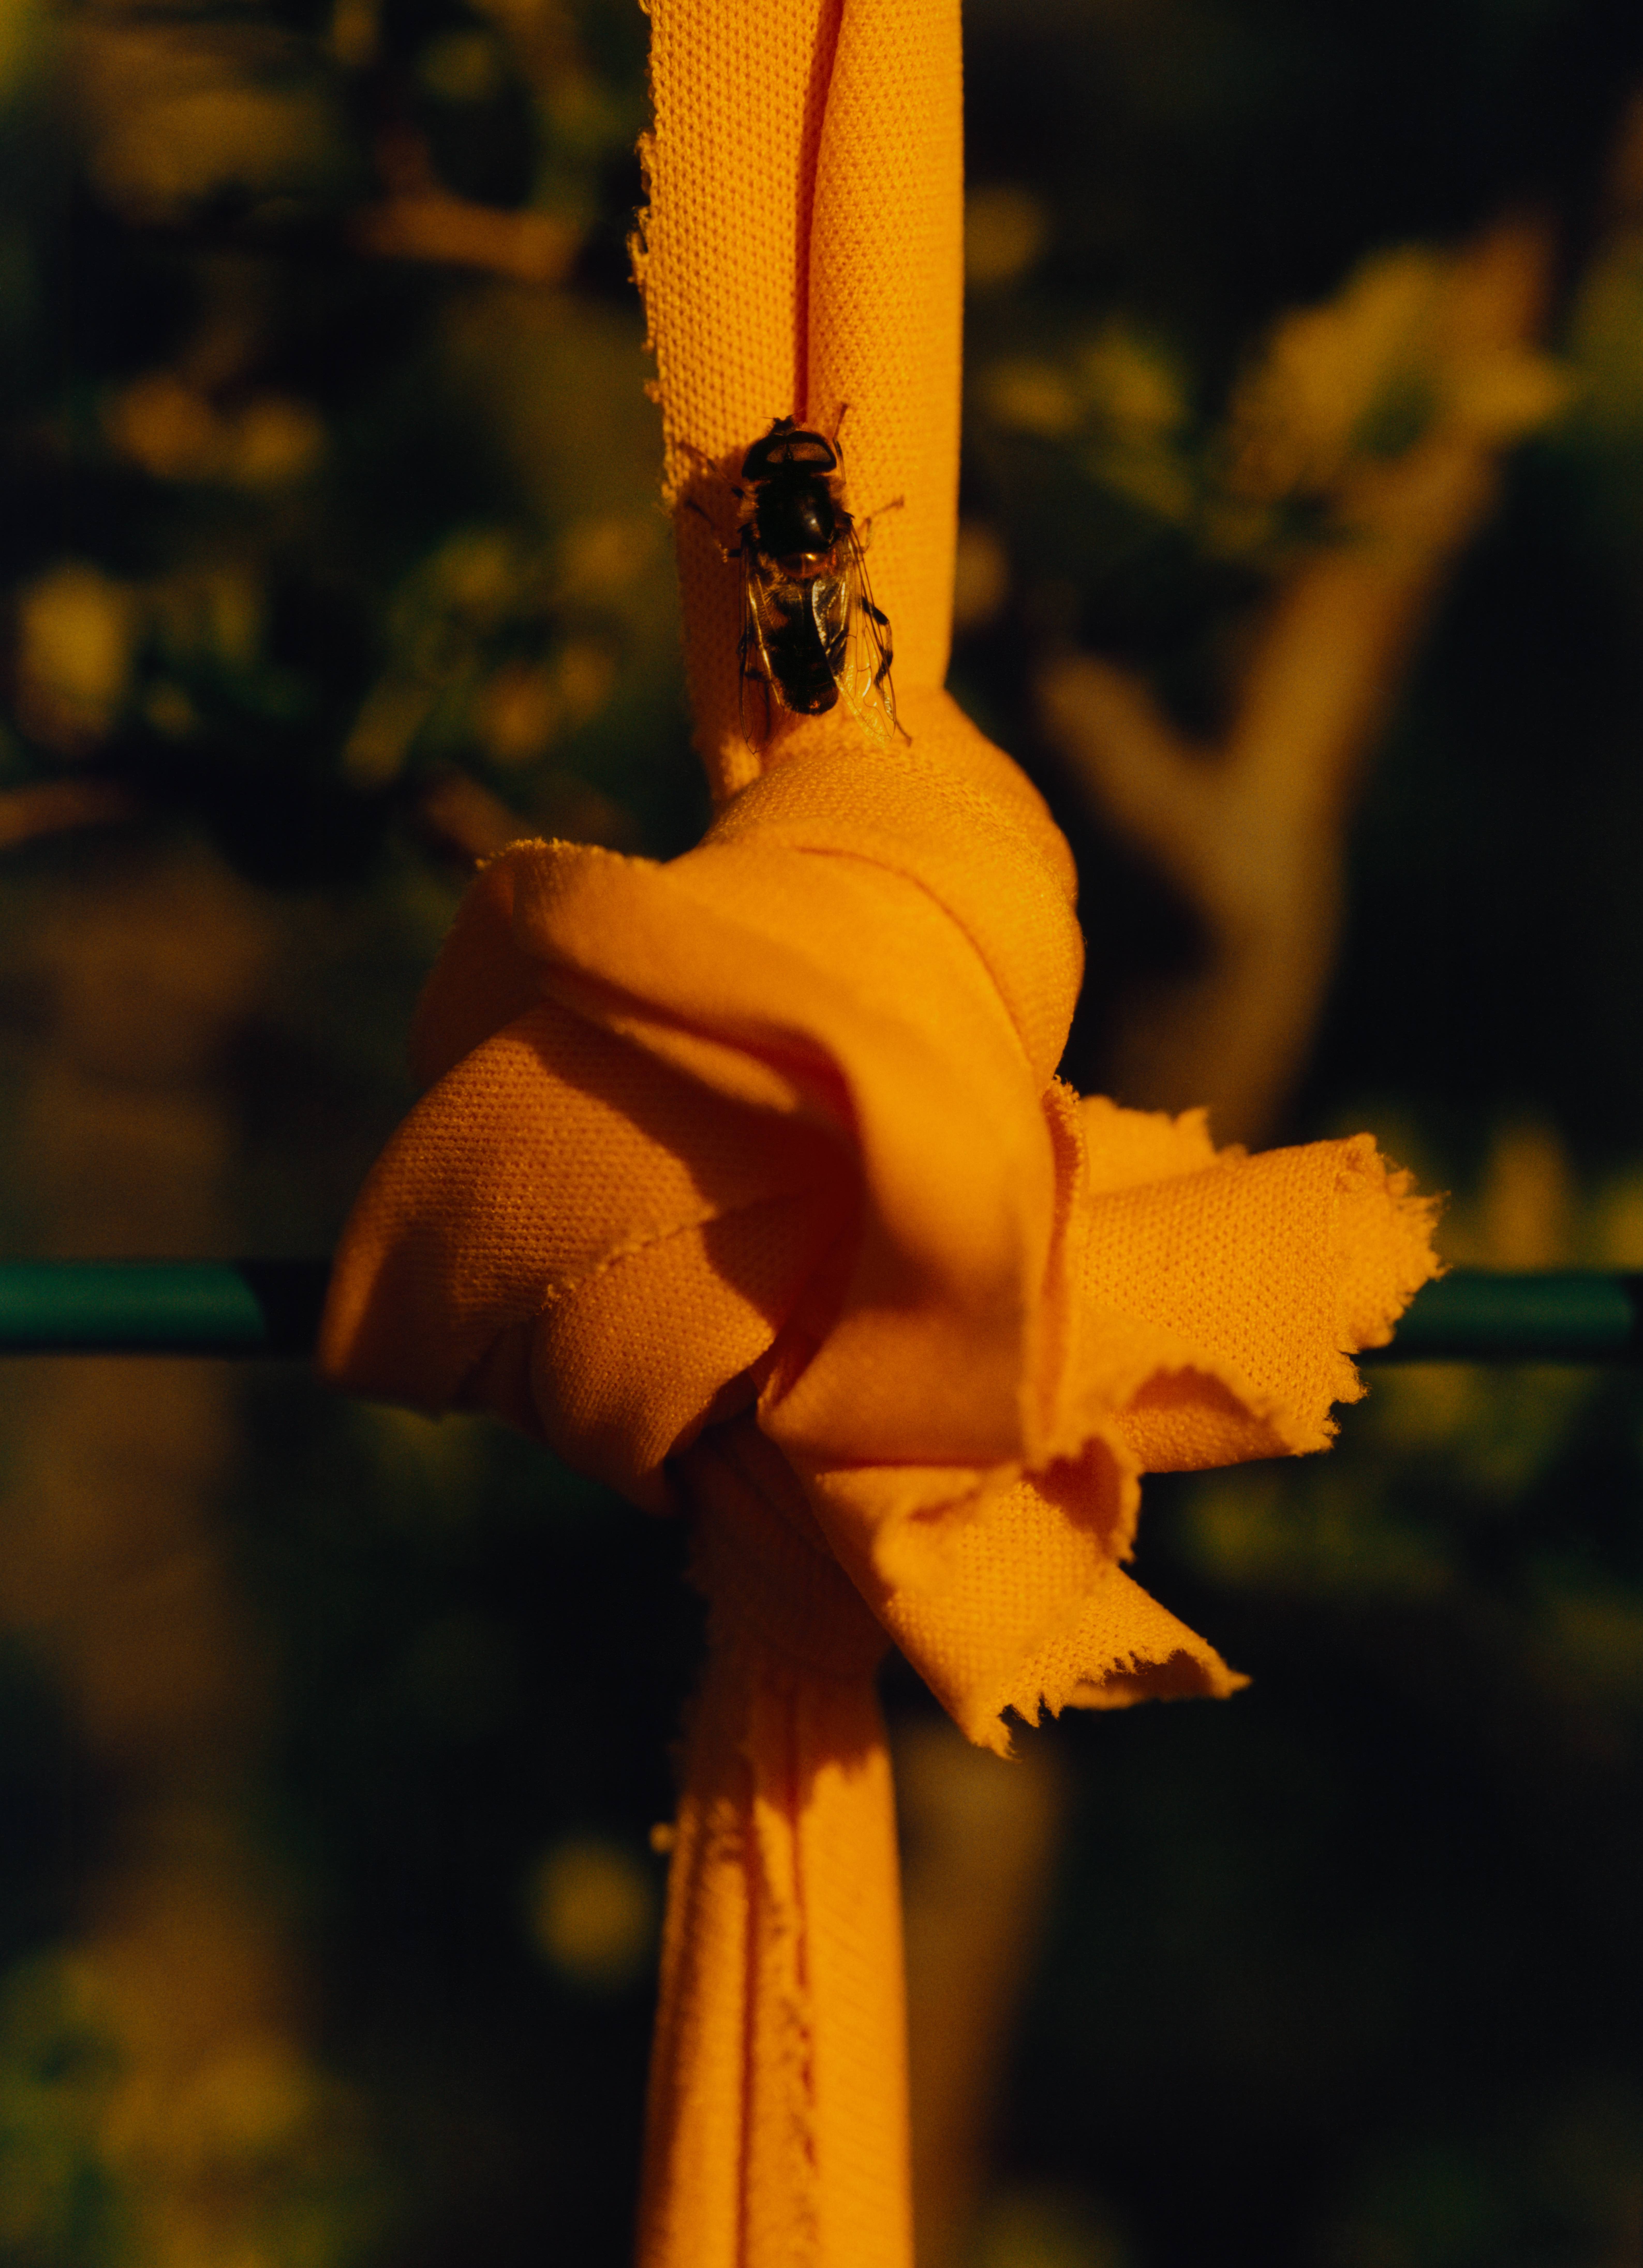 A close-up photograph of a bee that has landed on a bit of yellow fabric that has been knotted on a fence.